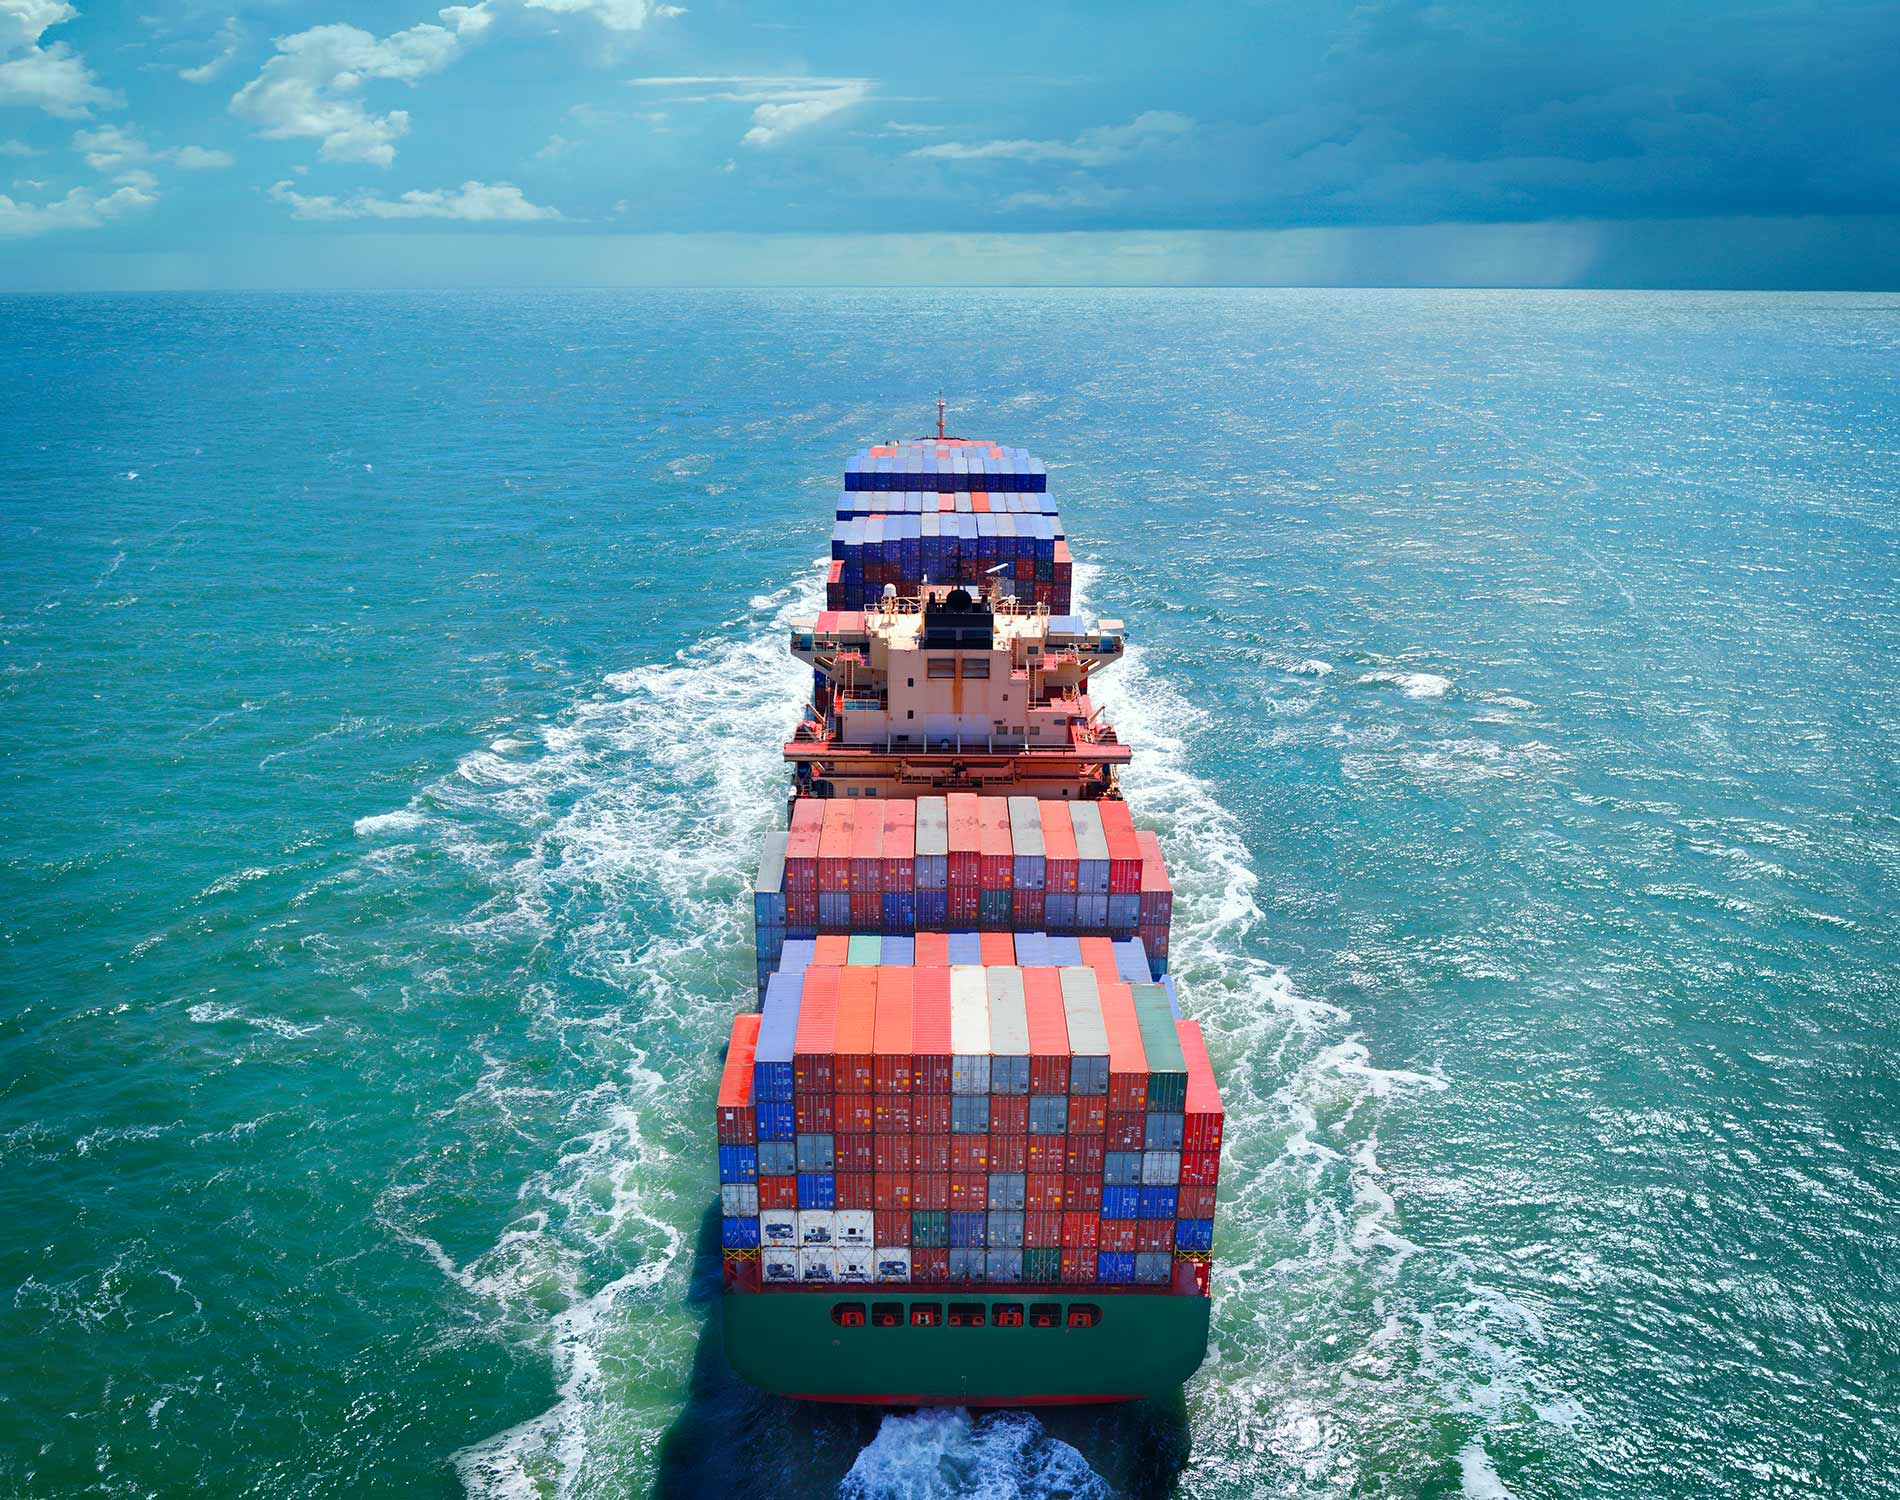 Aerial view of freight ship with cargo containers